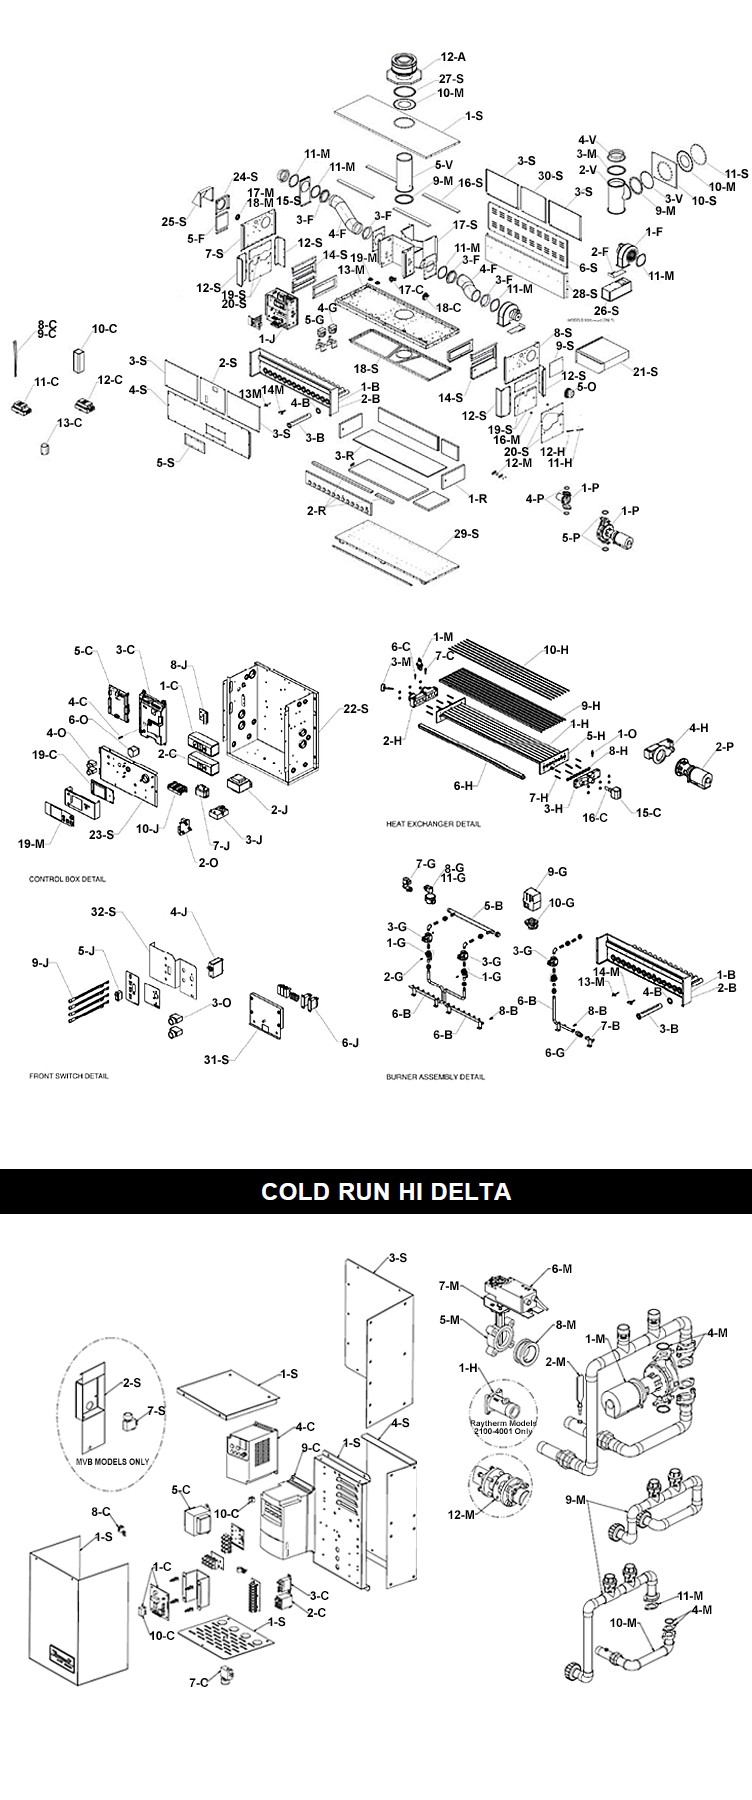 Raypak HI Delta Cold Run P-902C Commercial Indoor-Outdoor Swimming Pool Heater | Natural Gas 900,000 BTUH | 016087 Parts Schematic